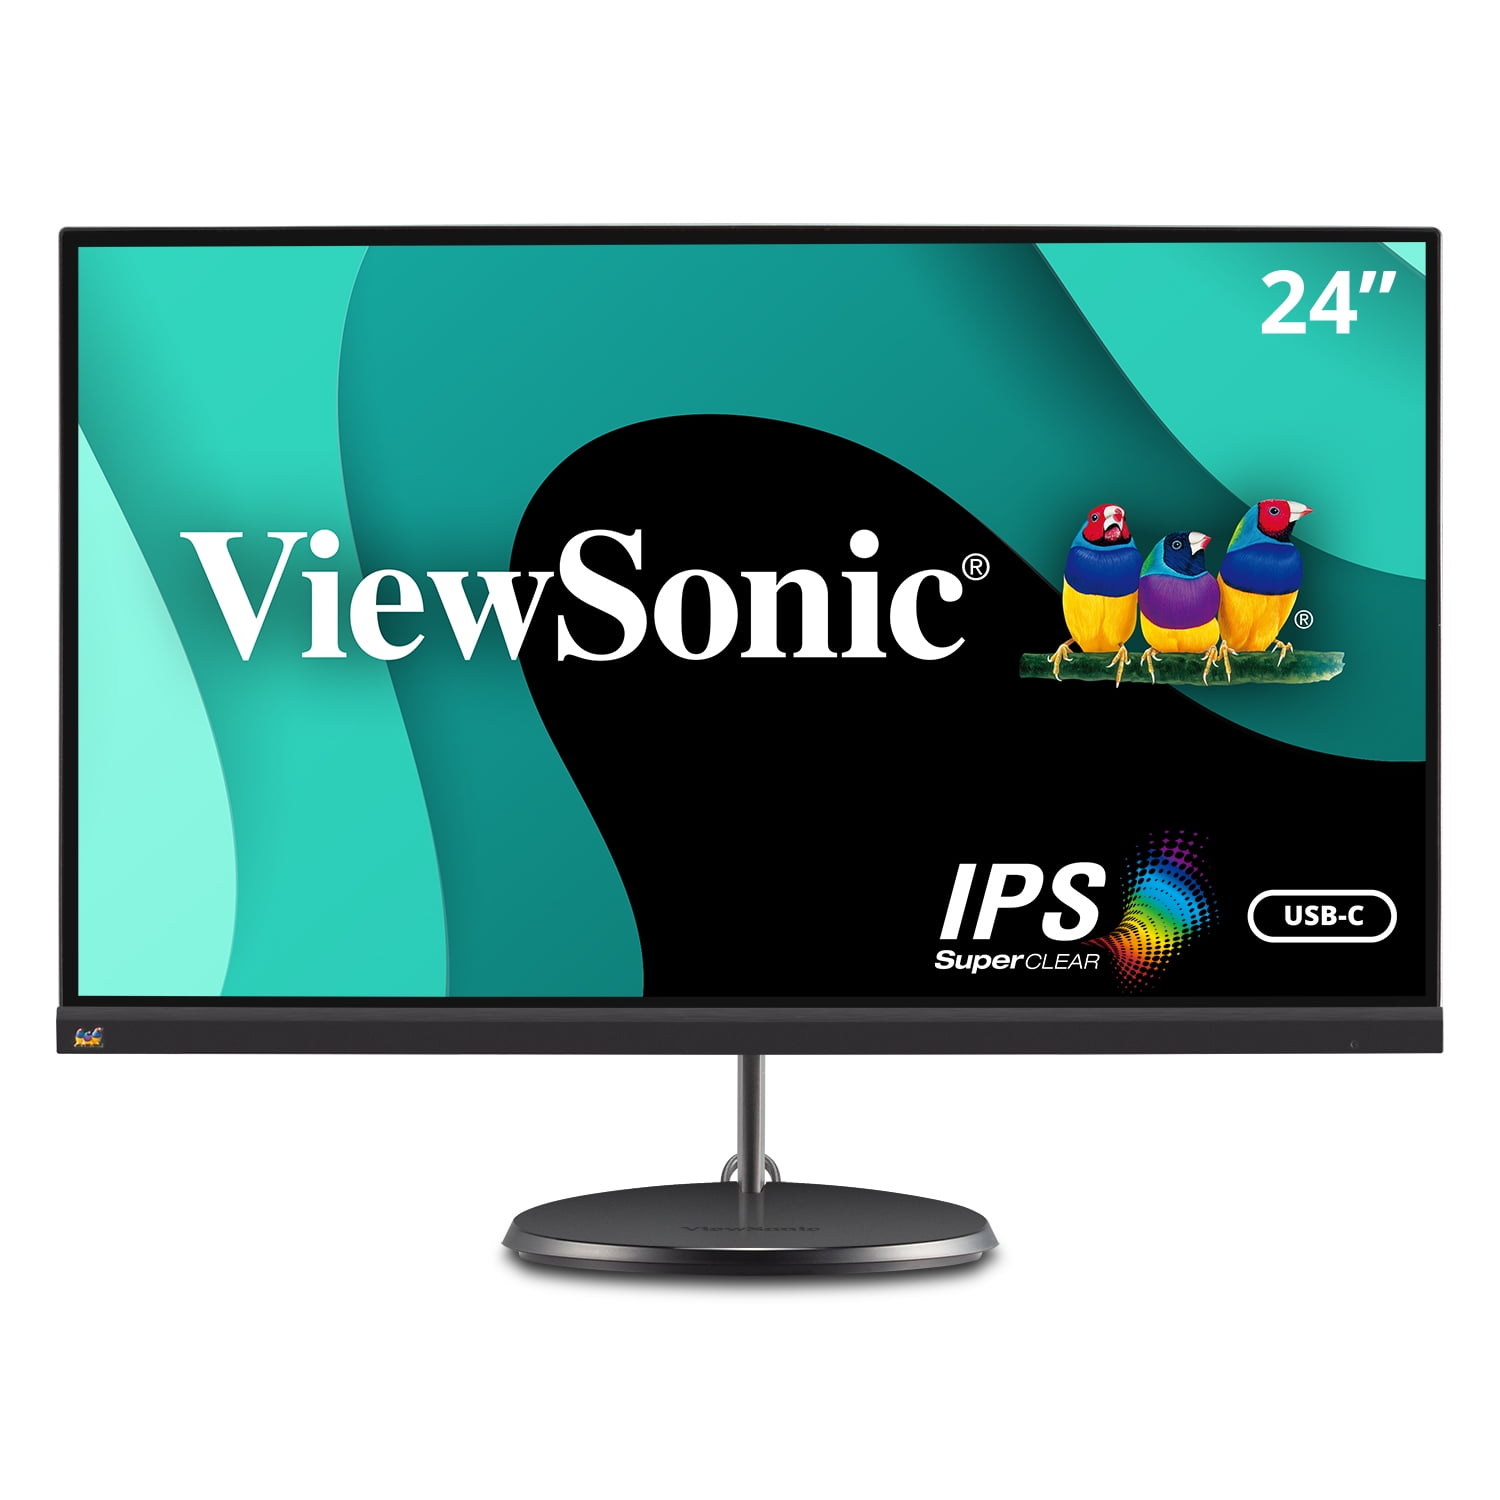 ViewSonic VG2440 24 Inch IPS 1080p Ergonomic Monitor with Integrate vDisplyManager HDMI DisplayPort VGA USB Inputs for Home and Office 